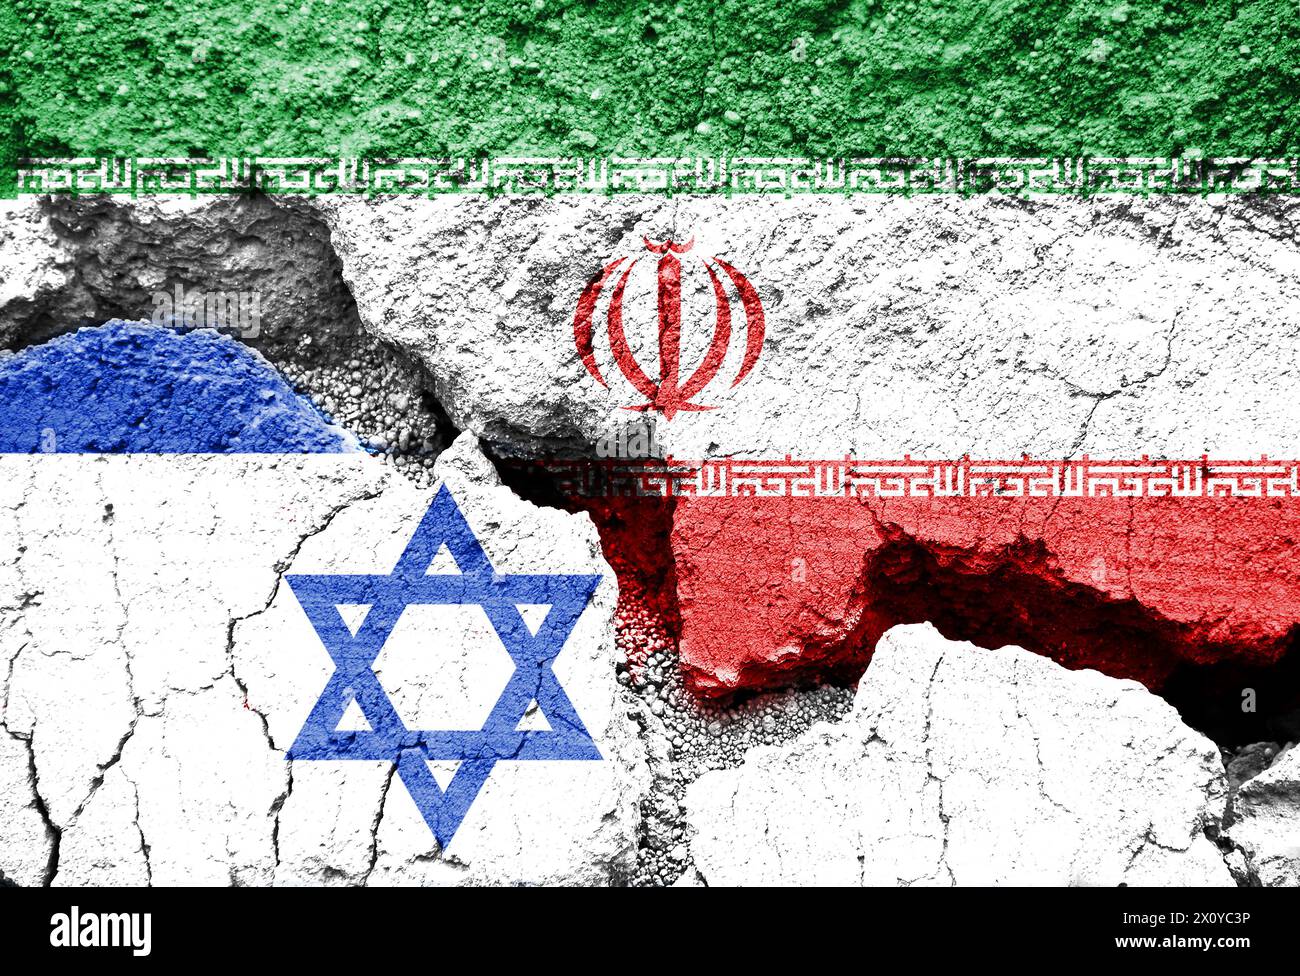 Flags of Israel and Iran on cracked background, Israeli Iranian conflict or war symbol Stock Photo